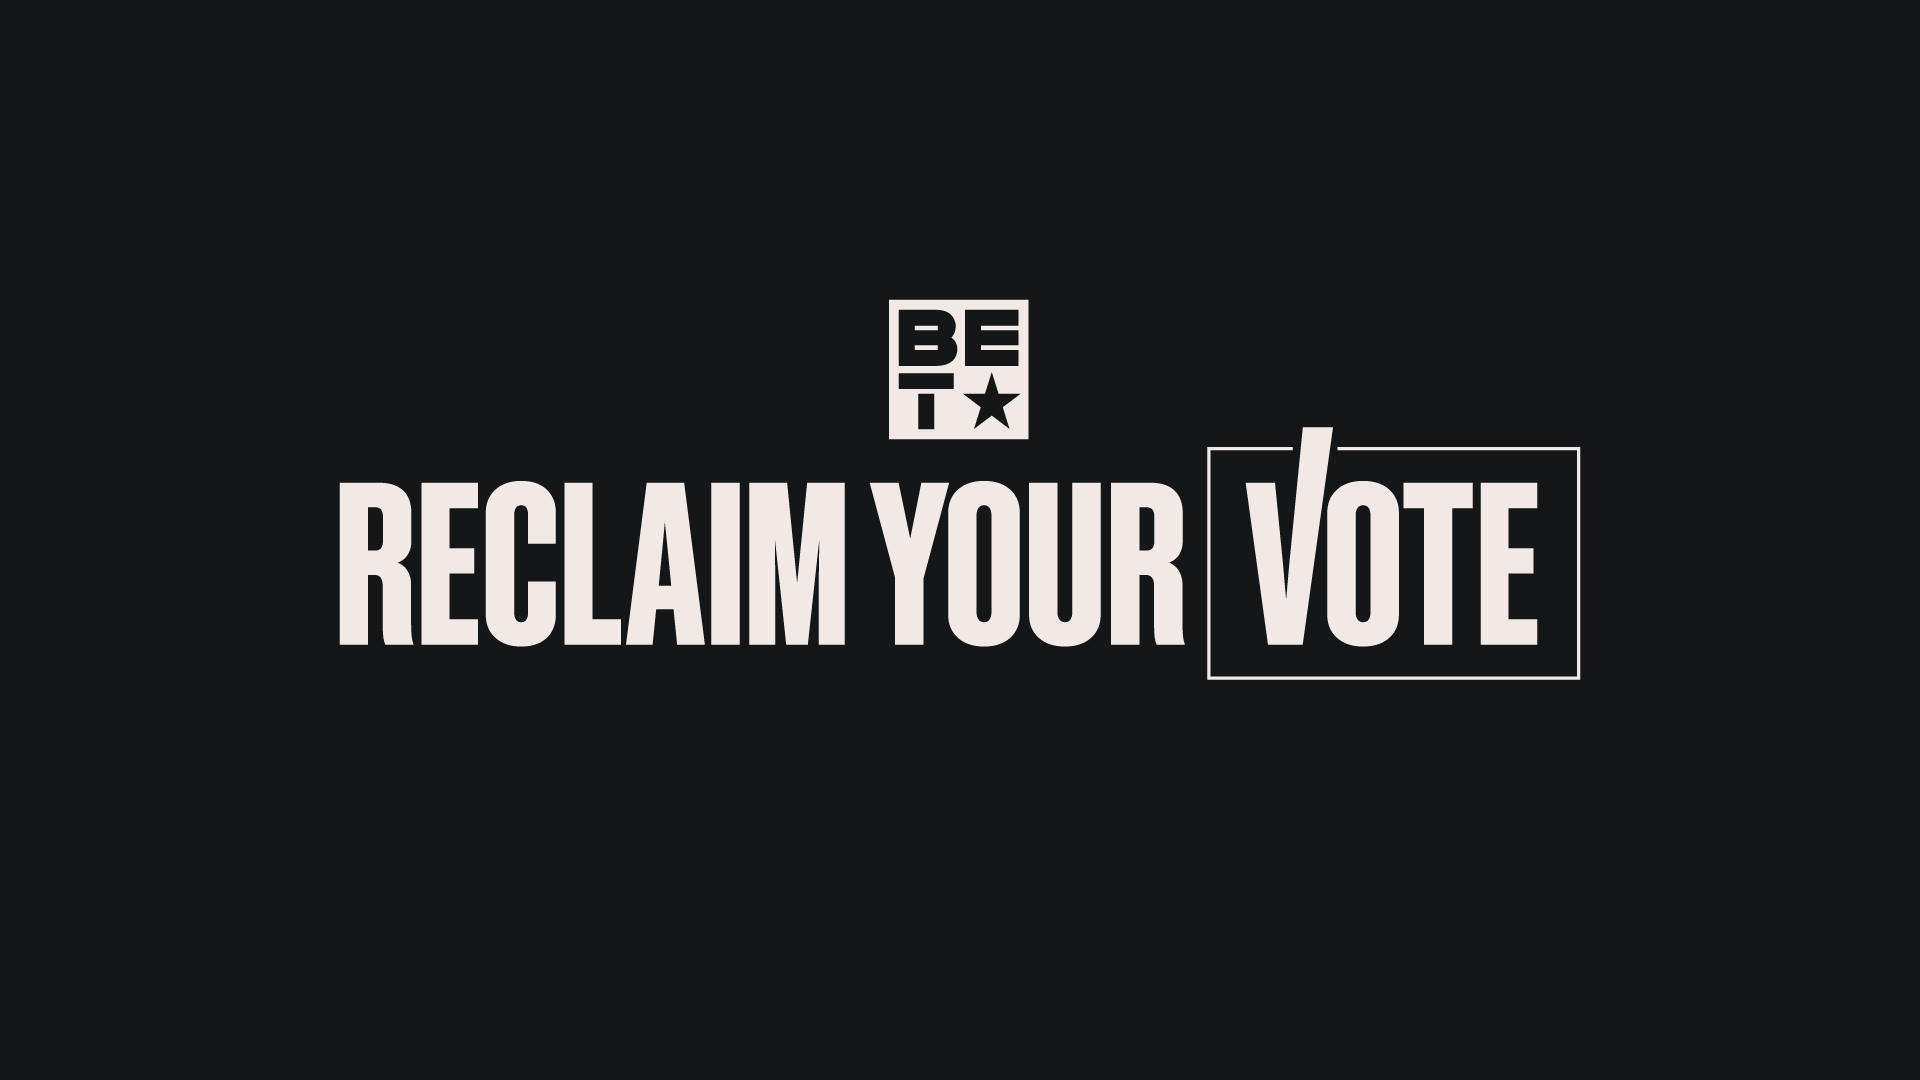 Black Voters Matter Announces  2023 “Reclaim Your Vote” Campaign In Partnership With BET To Increase Voter Engagement Efforts